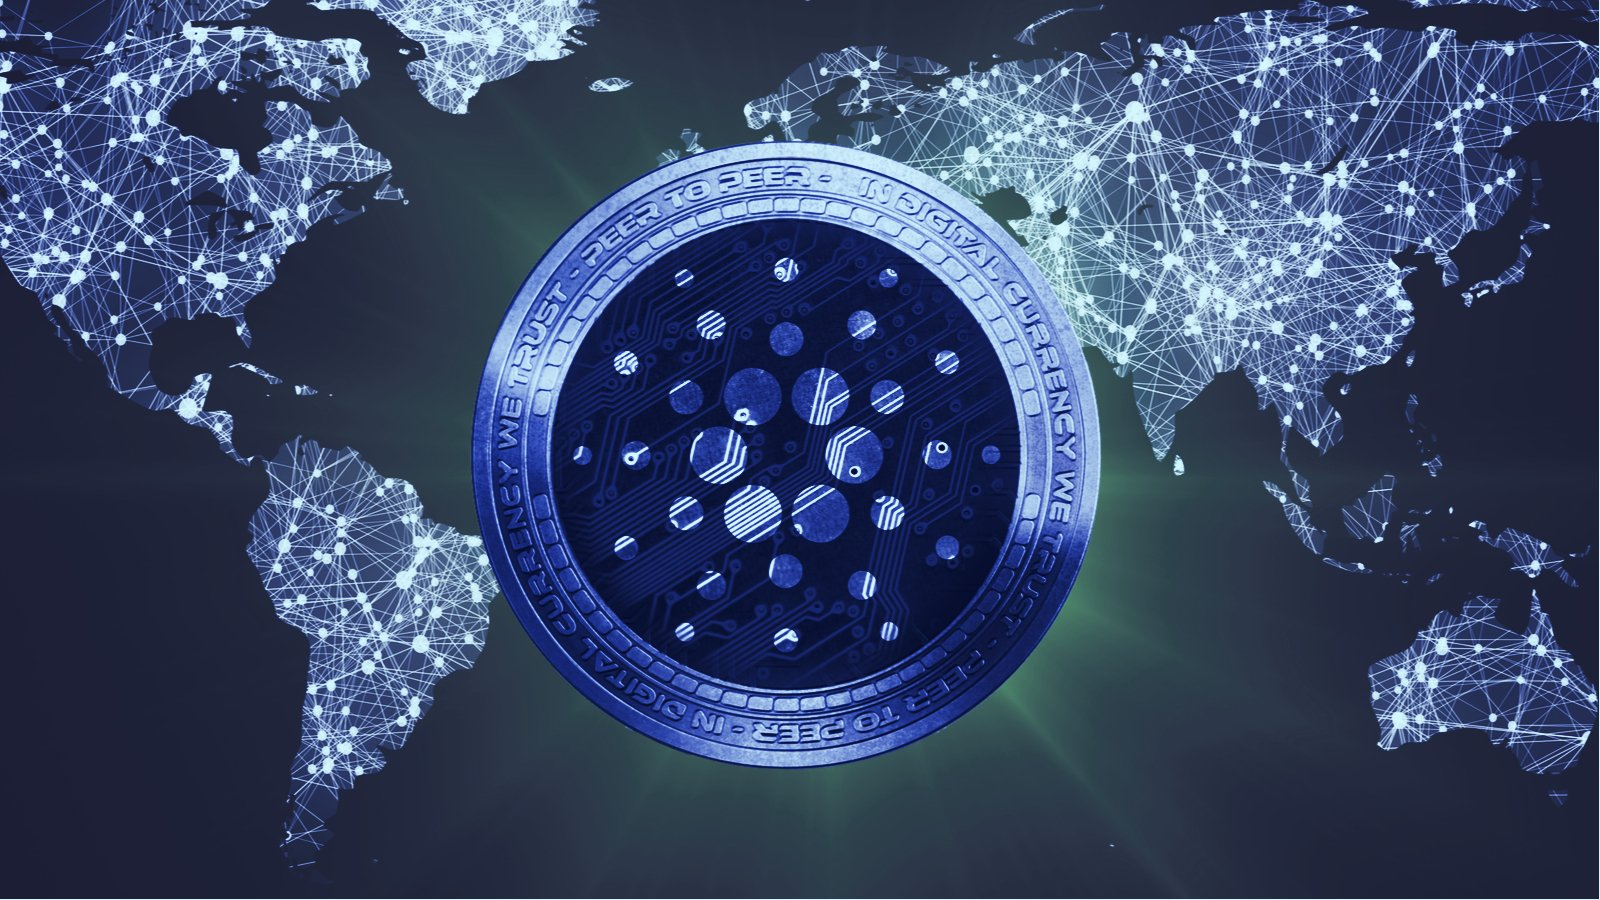 Cardano has the potential to become a scarce asset like Bitcoin